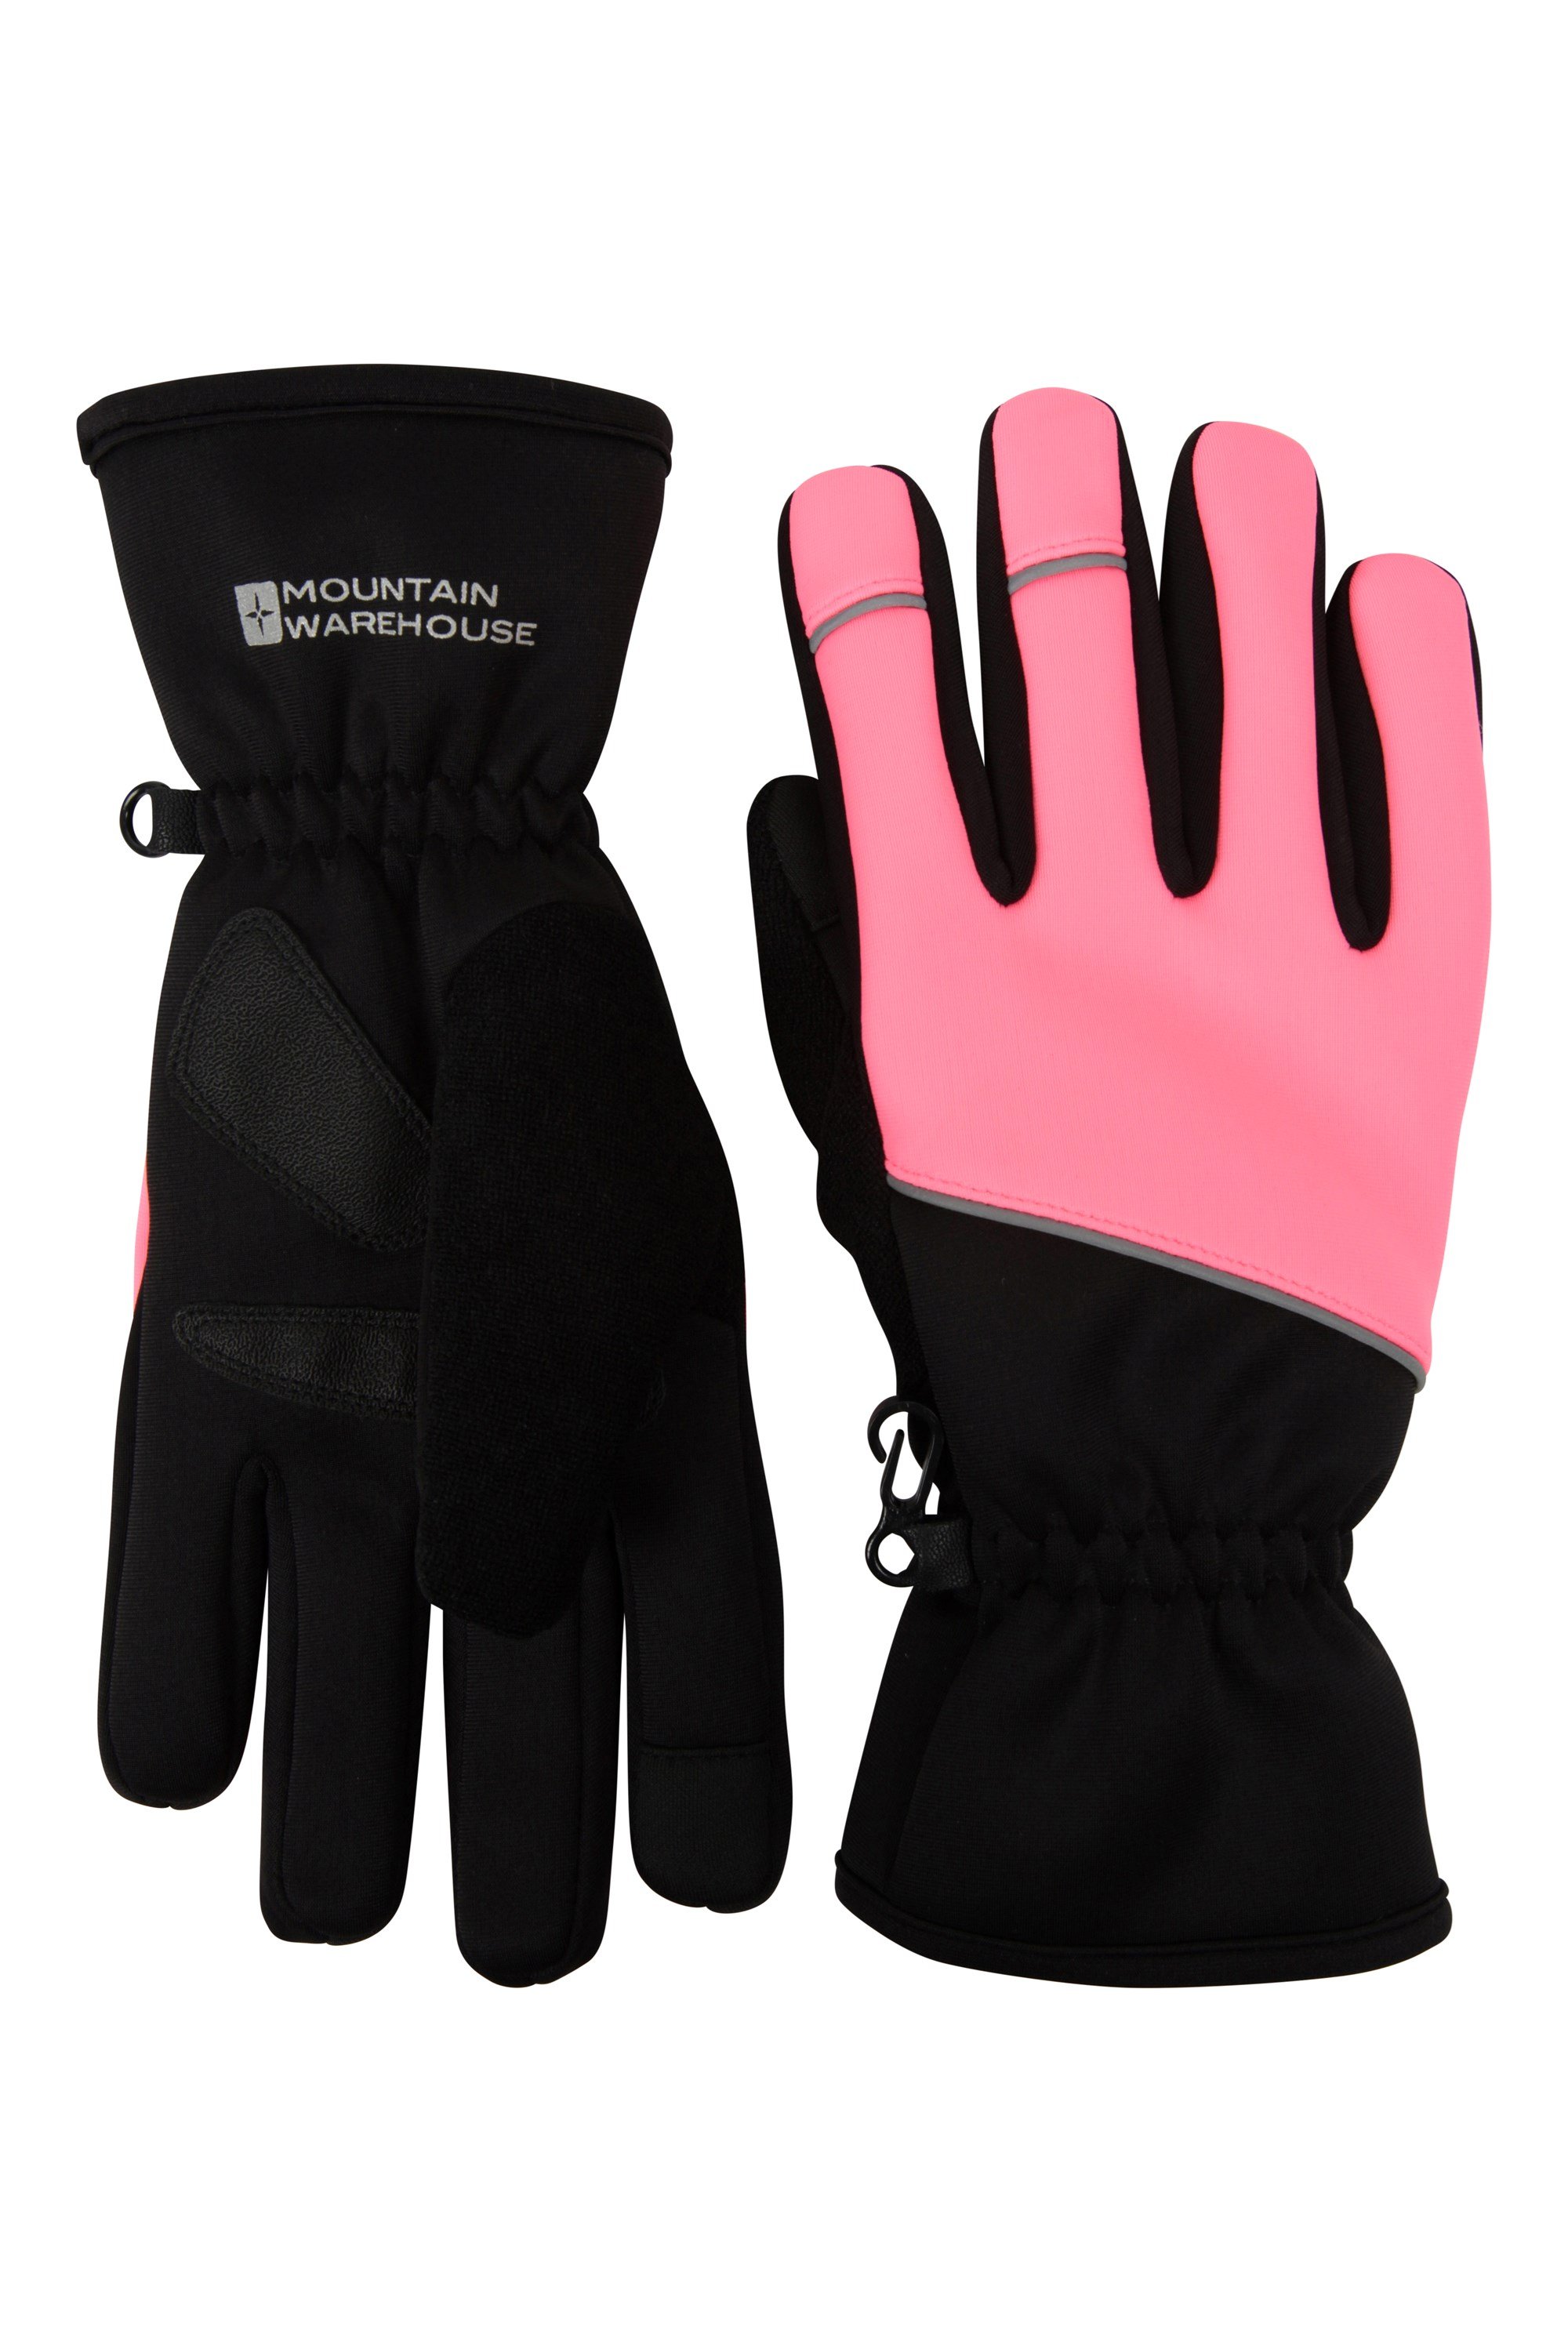 Mountain Warehouse Swift Womens Water-Resistant Cycling Gloves - Pink | Size S-M